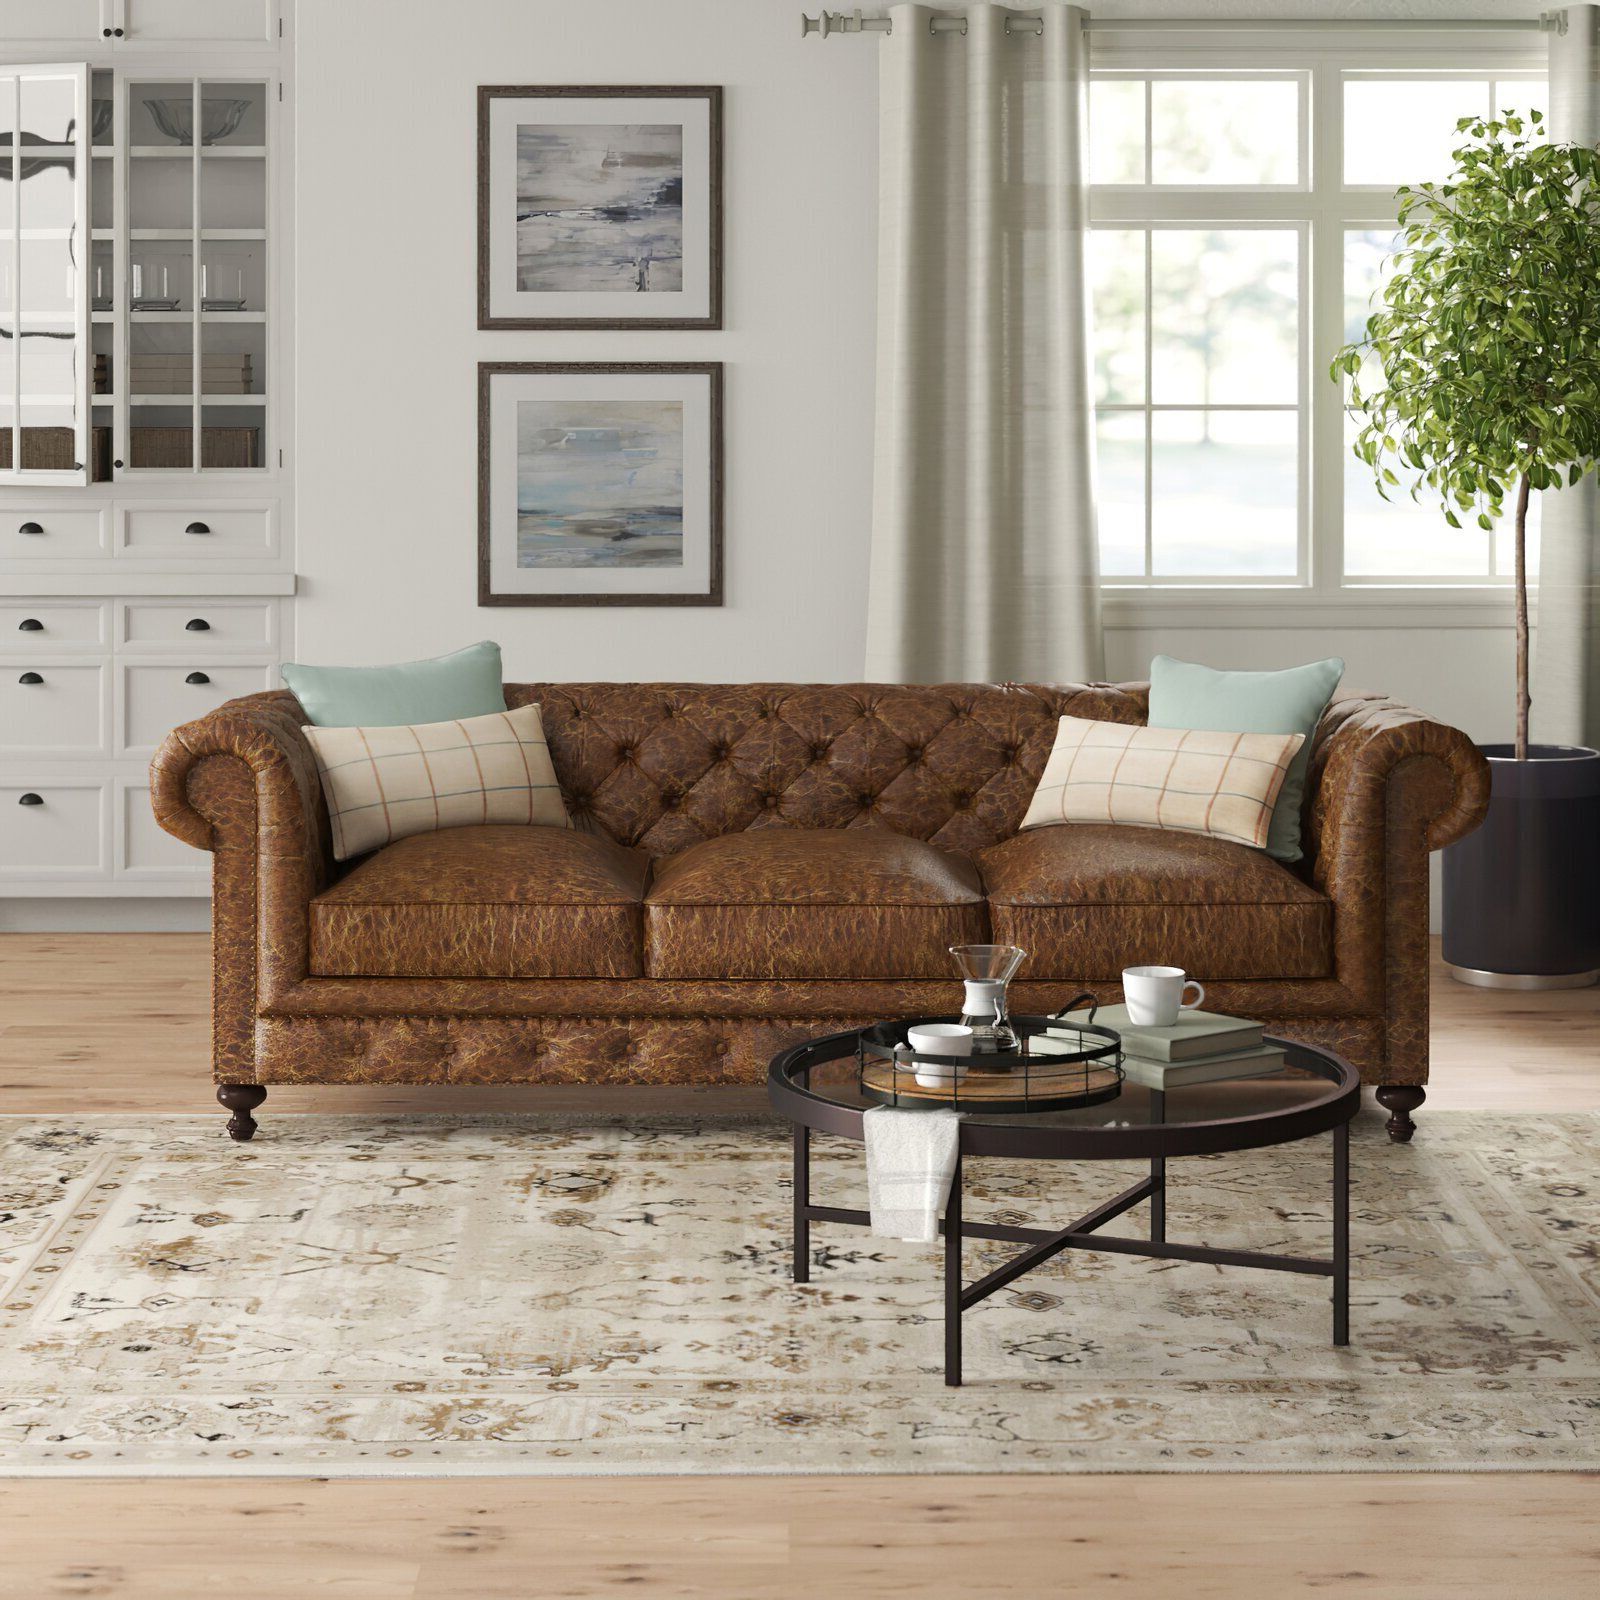 Leather Nailhead Sofas – Ideas On Foter In Sofas With Nailhead Trim (View 17 of 20)